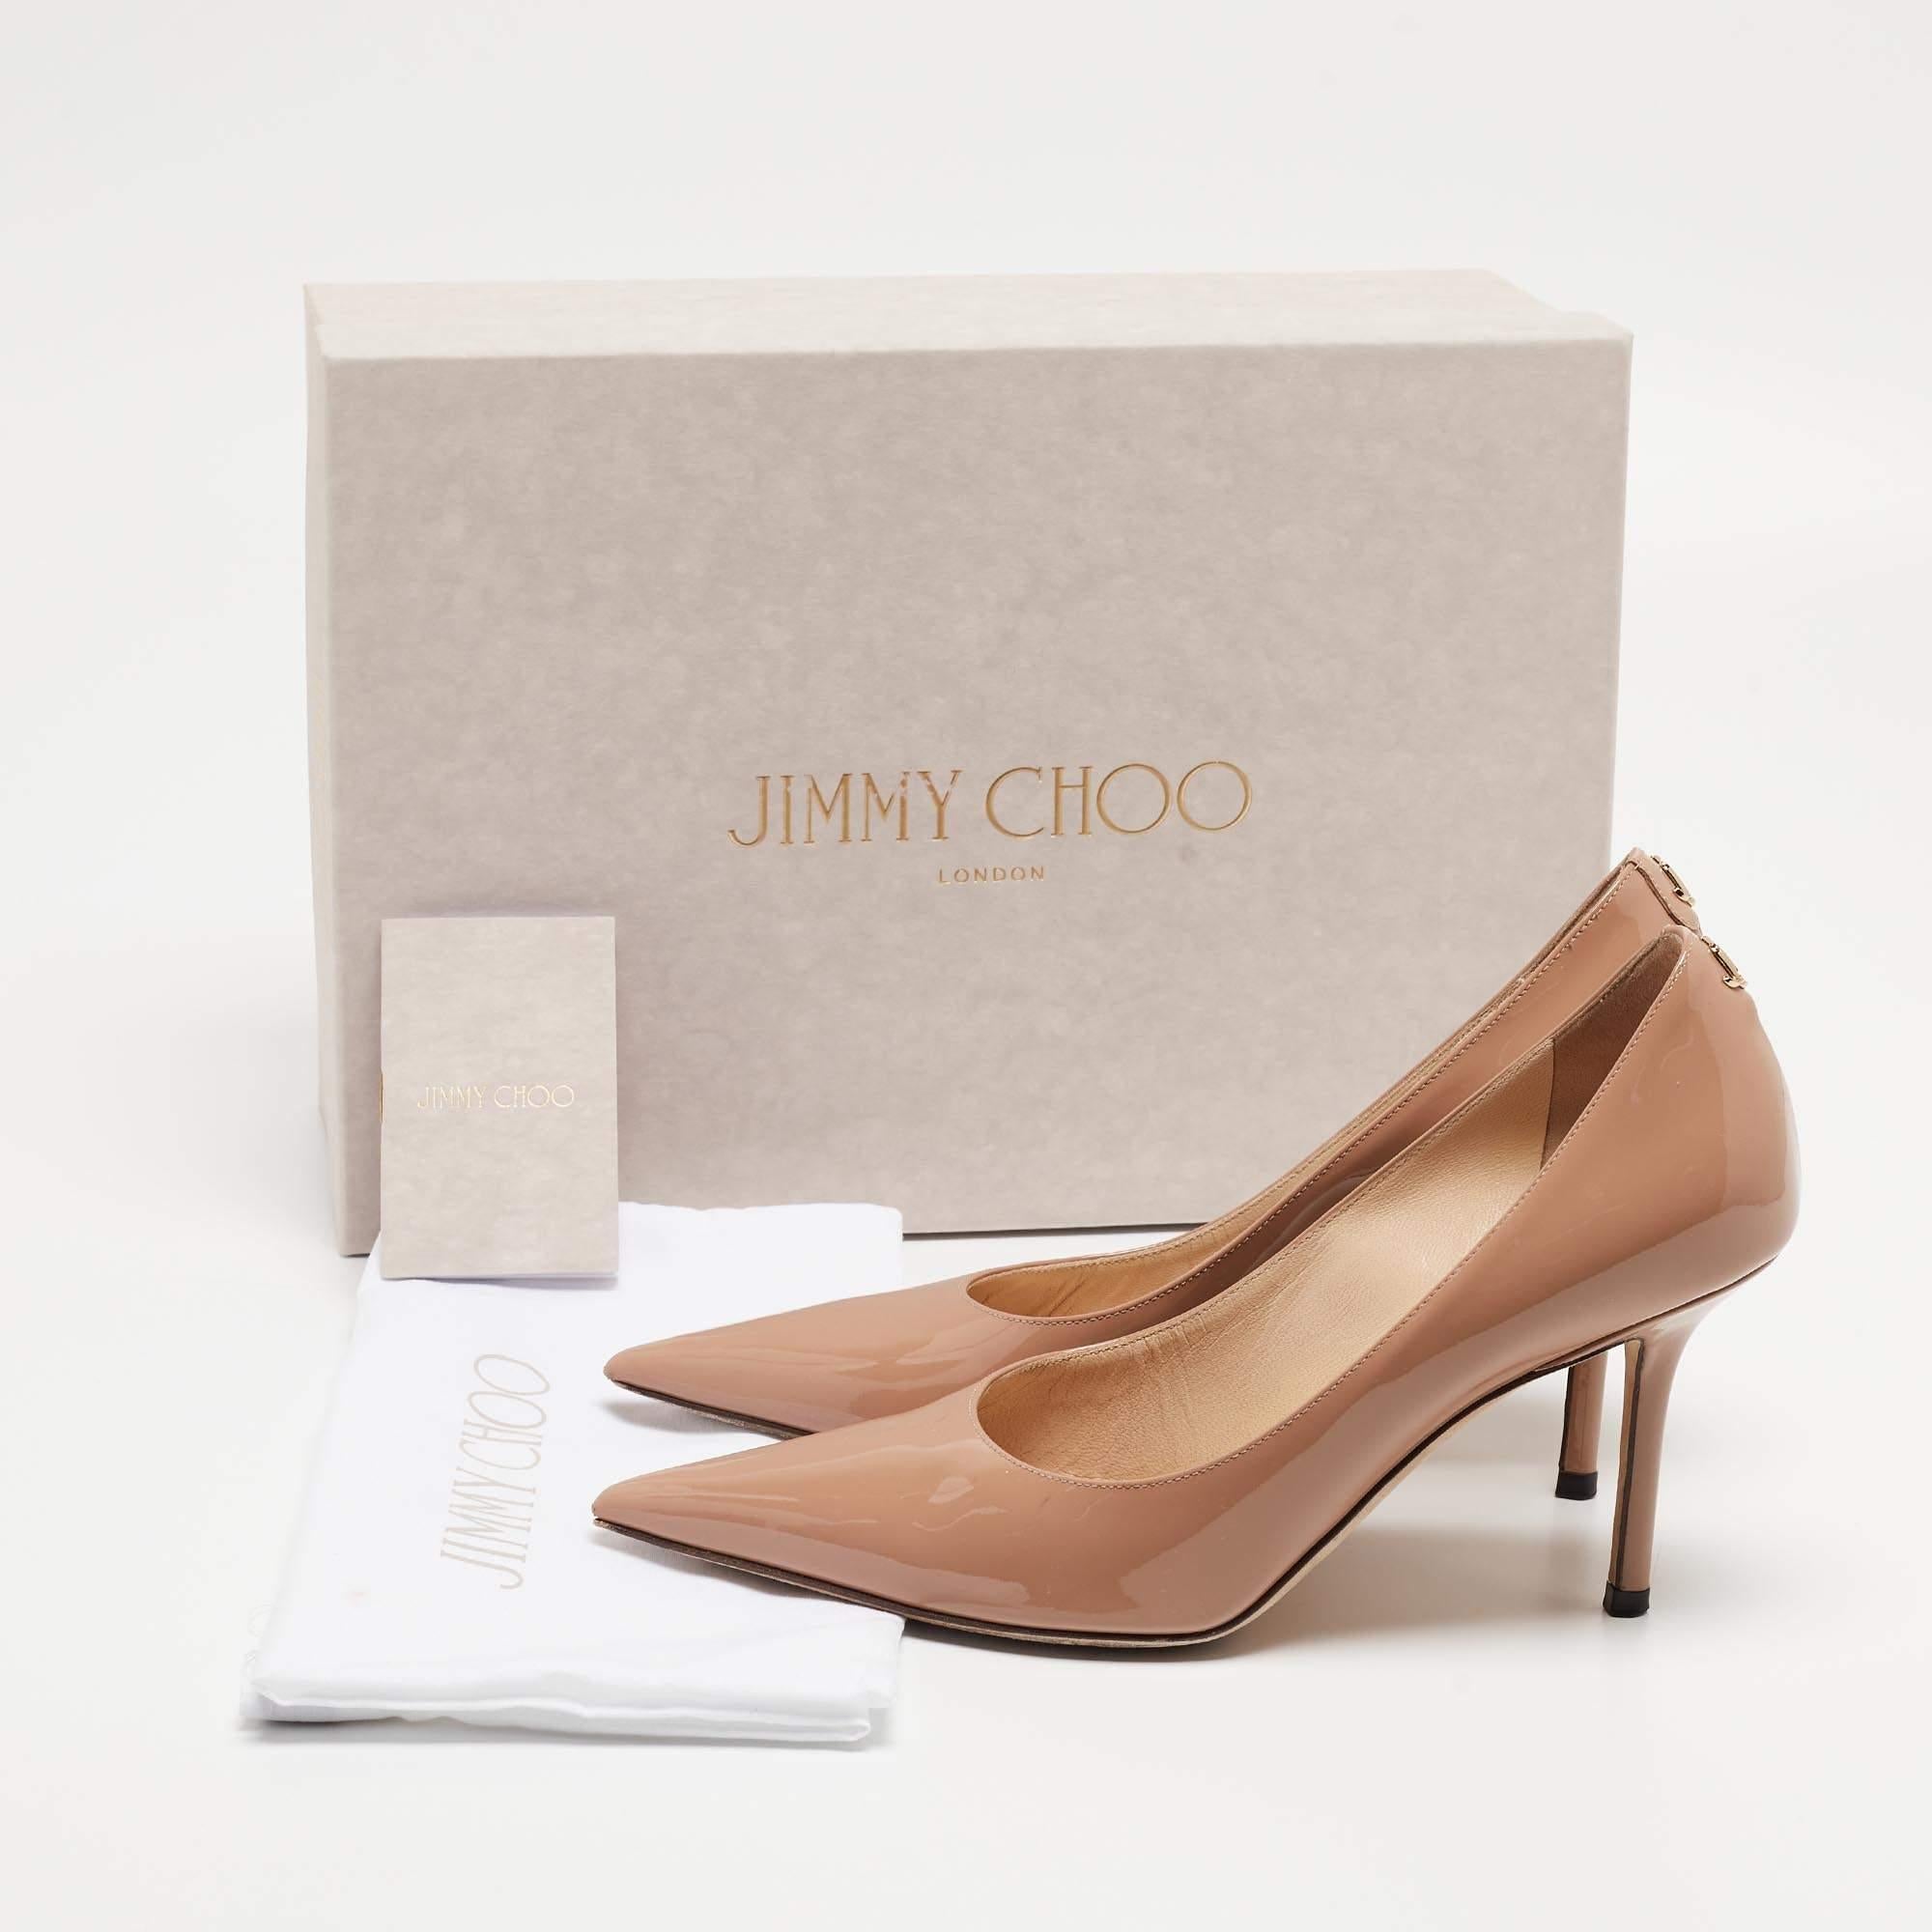 Jimmy Choo Dusty Pink Patent Leather Love Pumps Size 36 For Sale 5